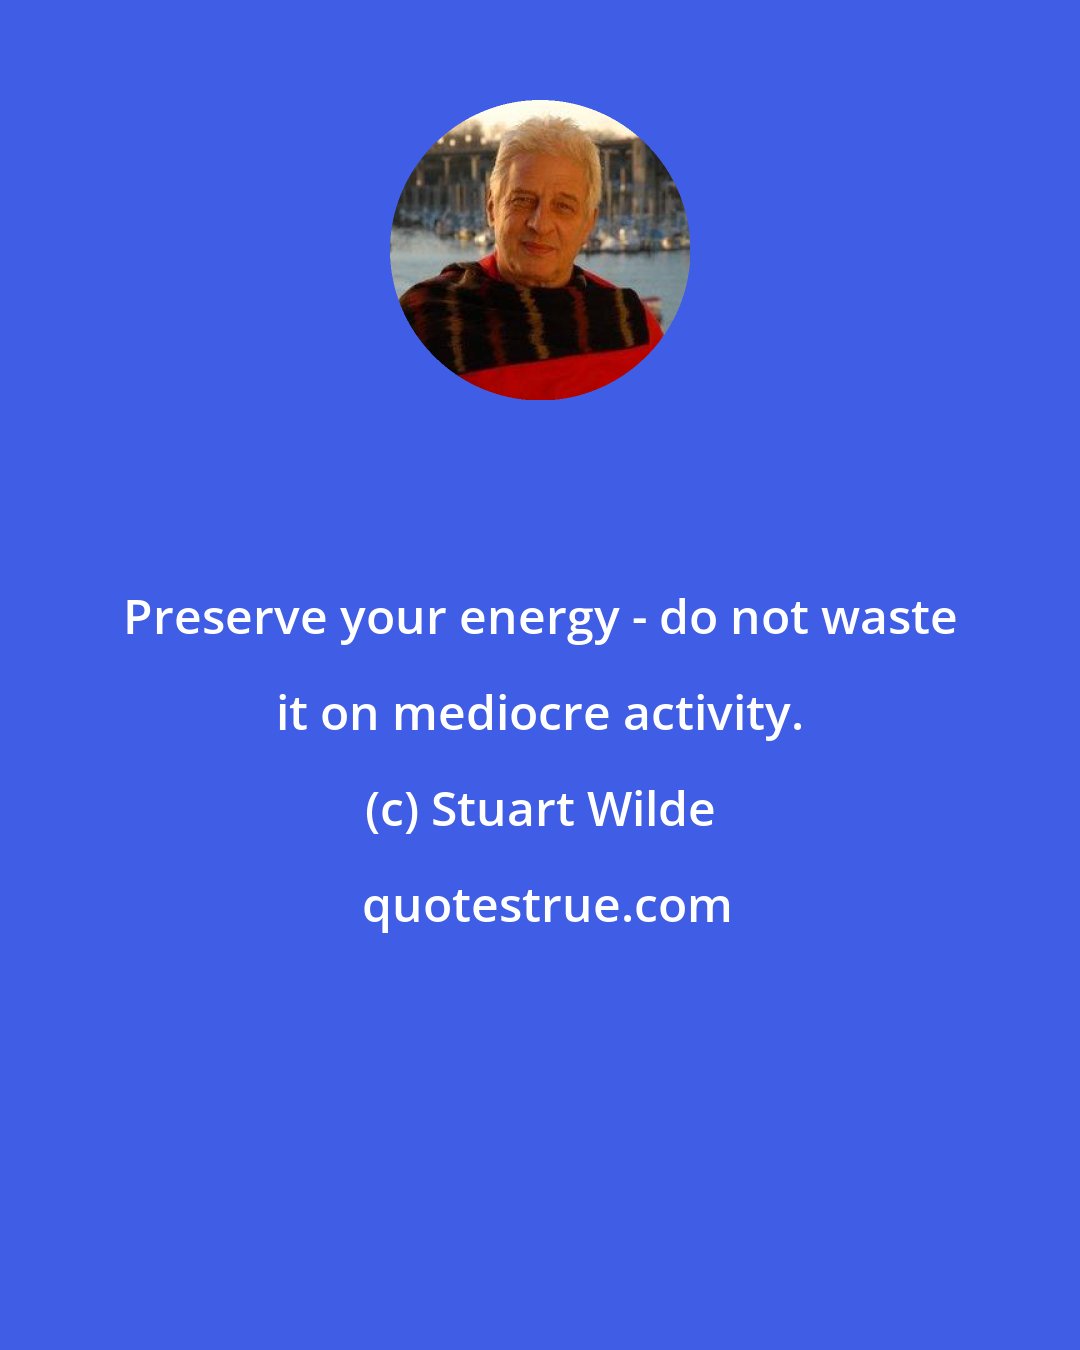 Stuart Wilde: Preserve your energy - do not waste it on mediocre activity.